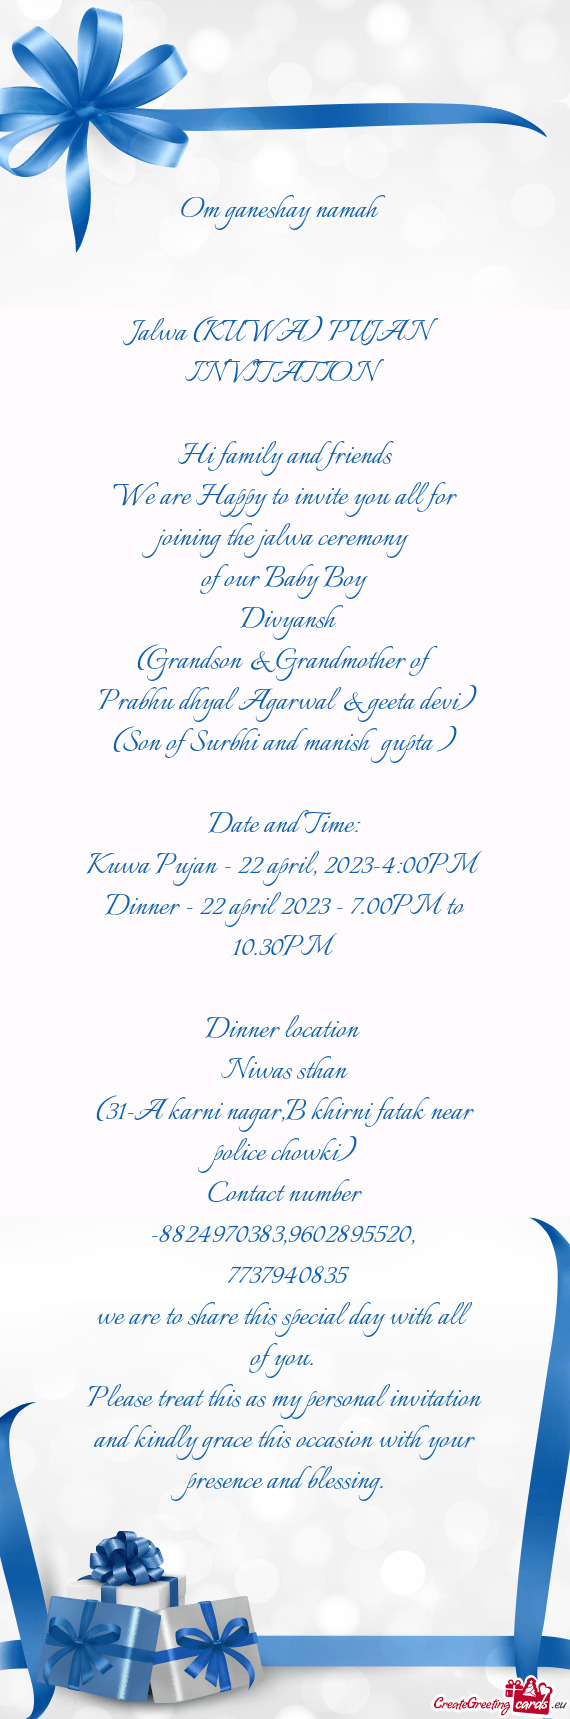 Dinner - 22 april 2023 - 7.00PM to 10.30PM